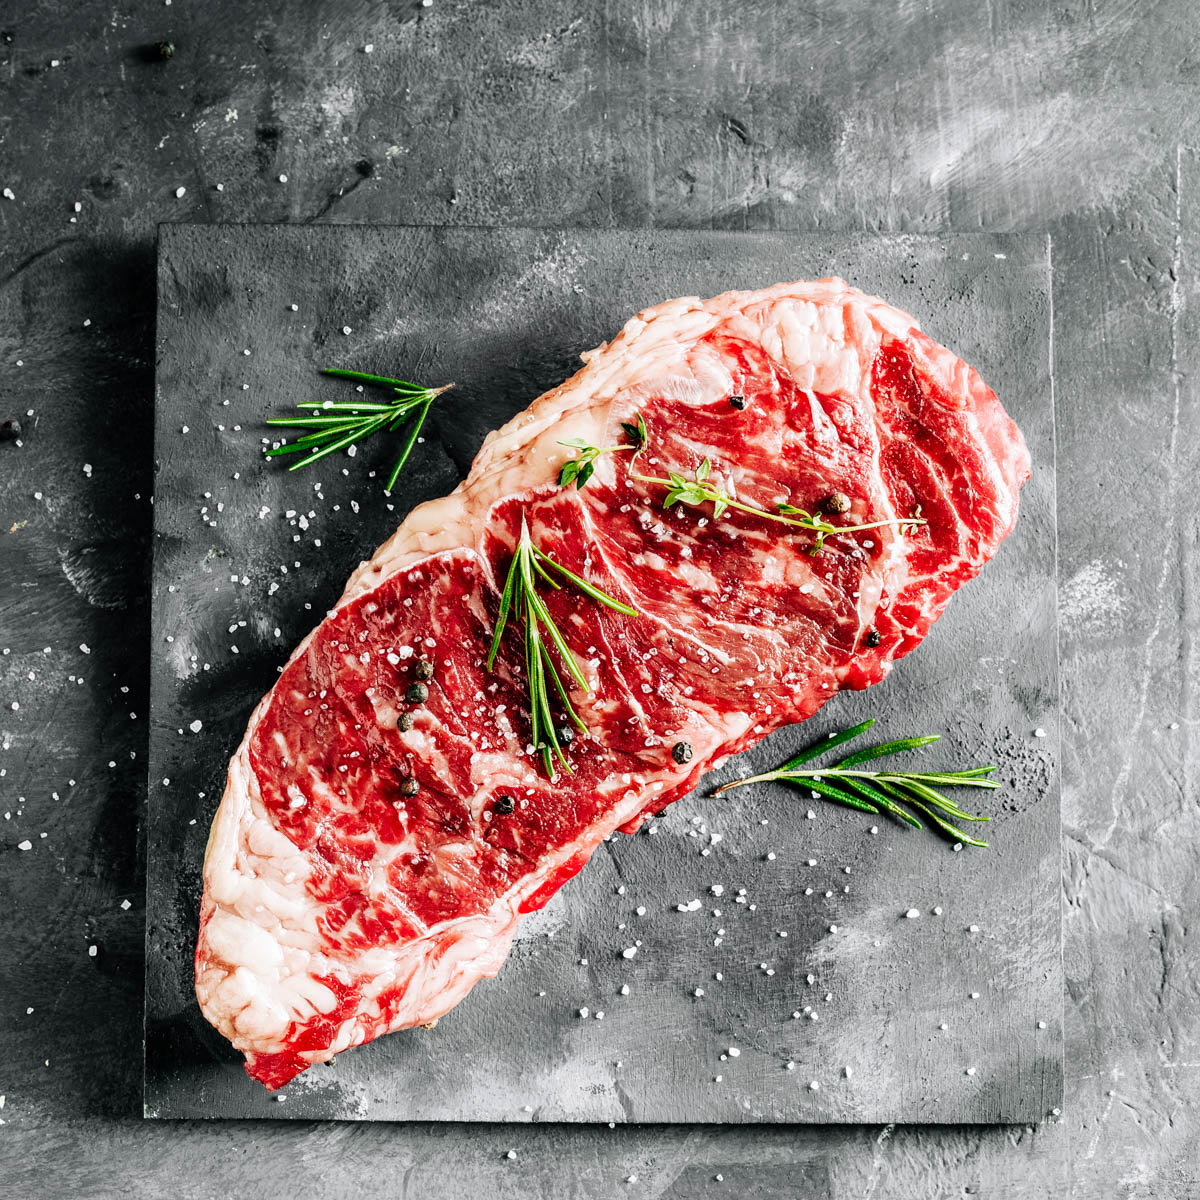 How Long Can Steak Sit Out Before Cooking?